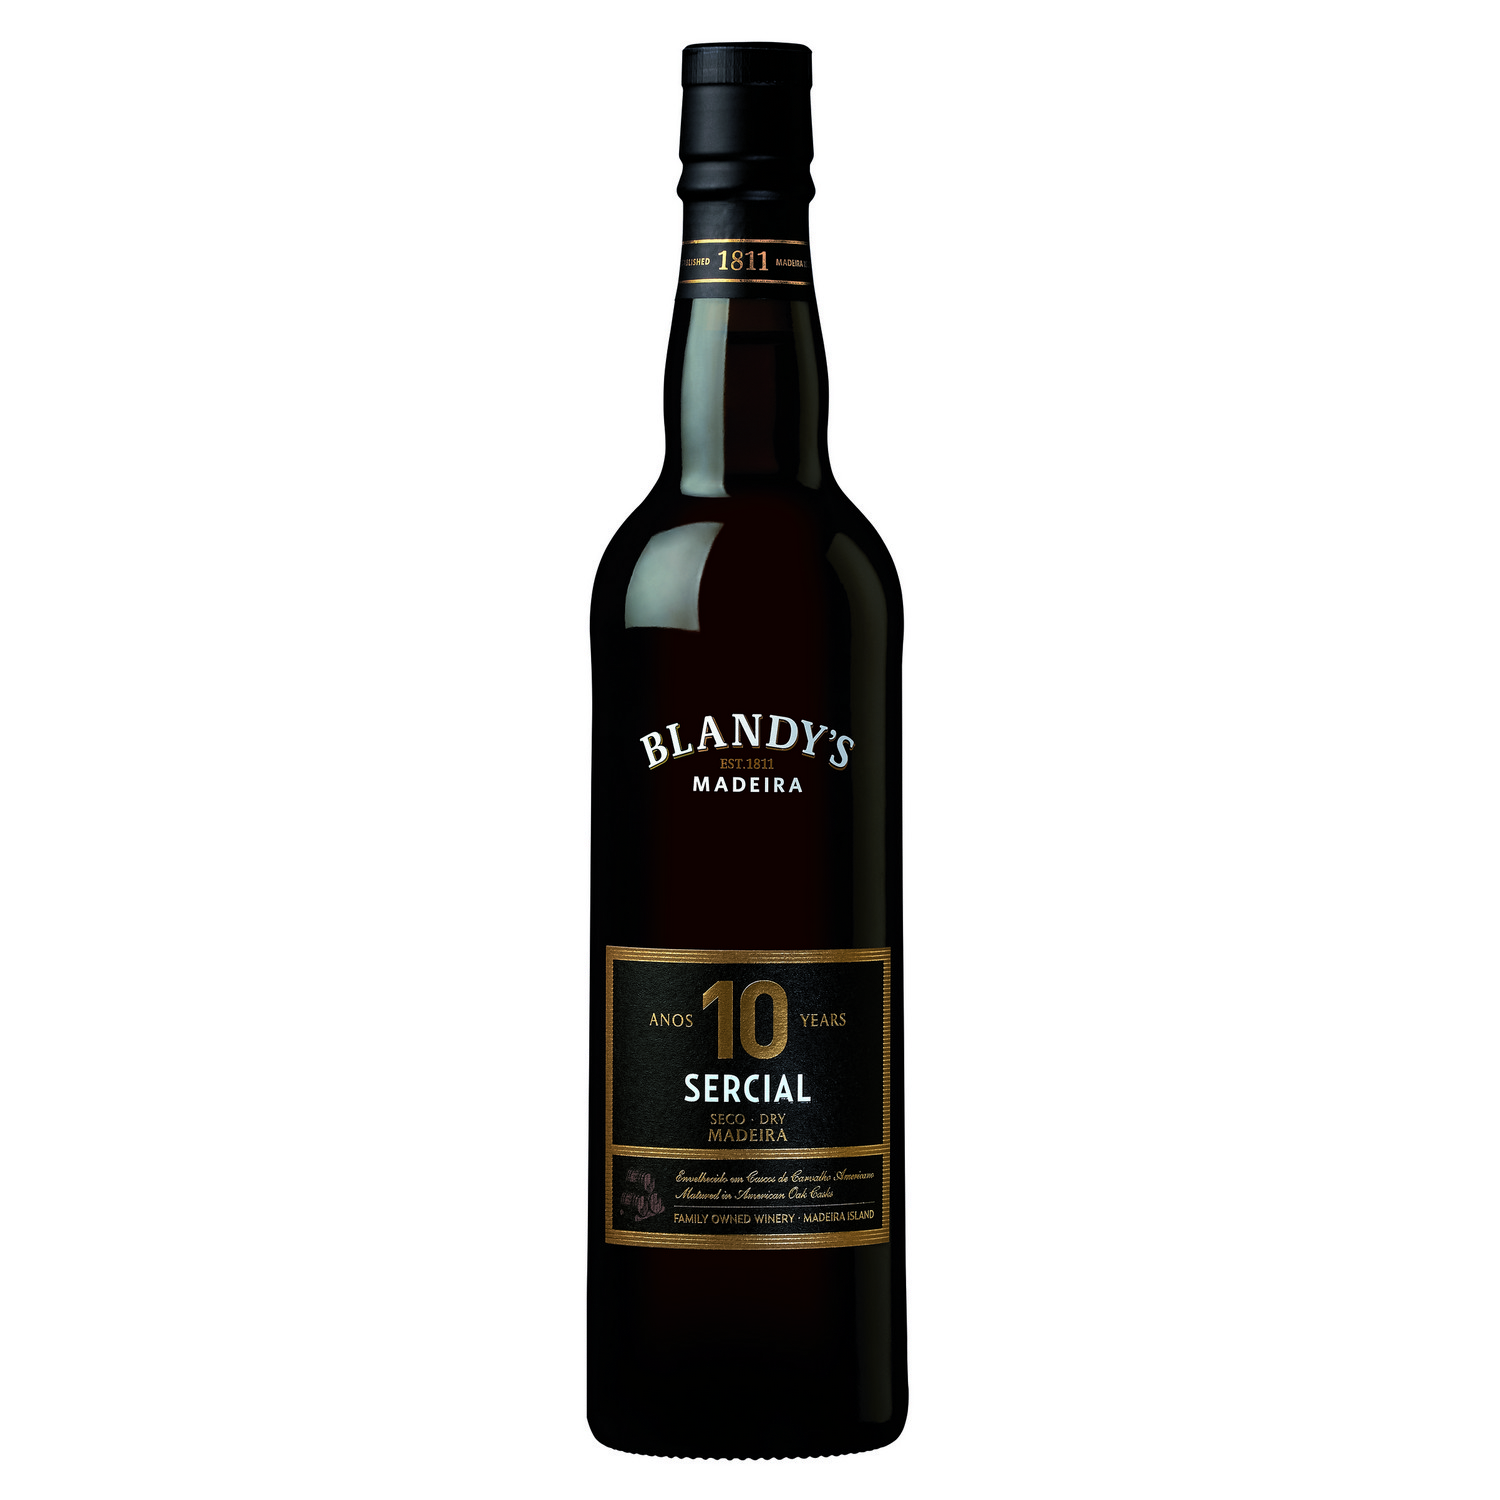 Blandys 10 years old sercial   19%   50cl